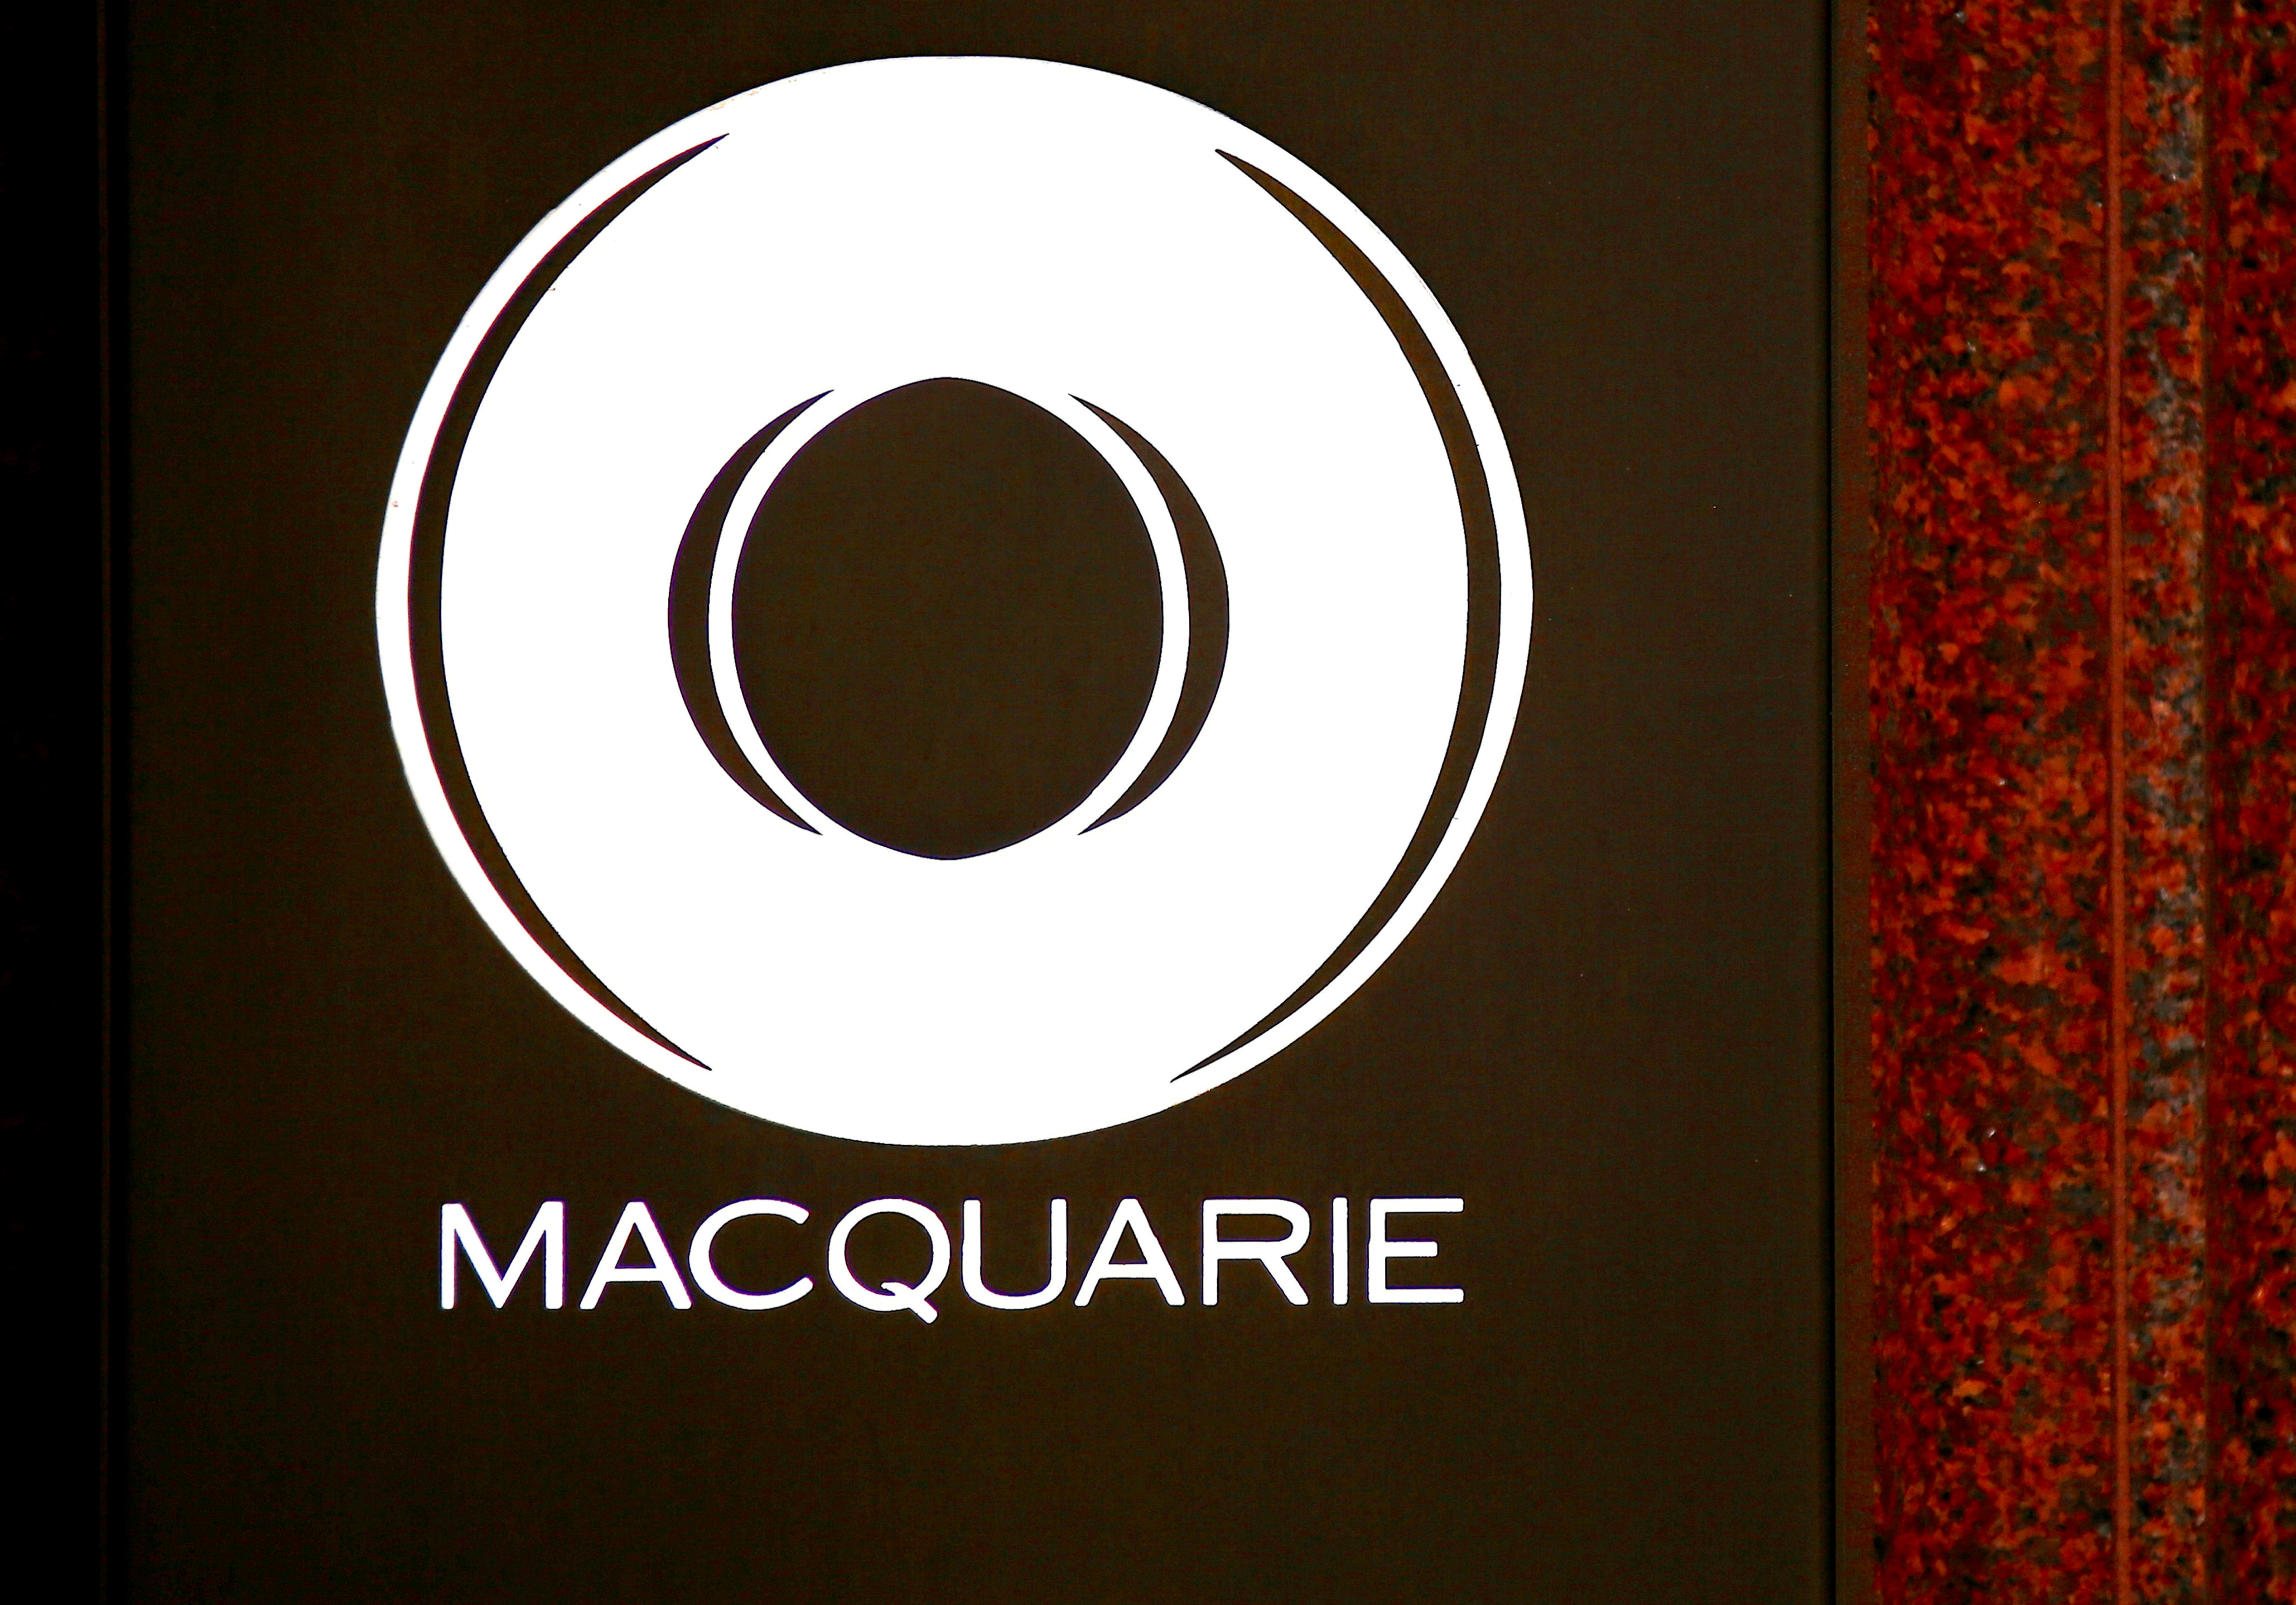 The logo of Australia's biggest investment bank Macquarie Group Ltd adorns the main entrance to their Sydney office headquarters in Australia